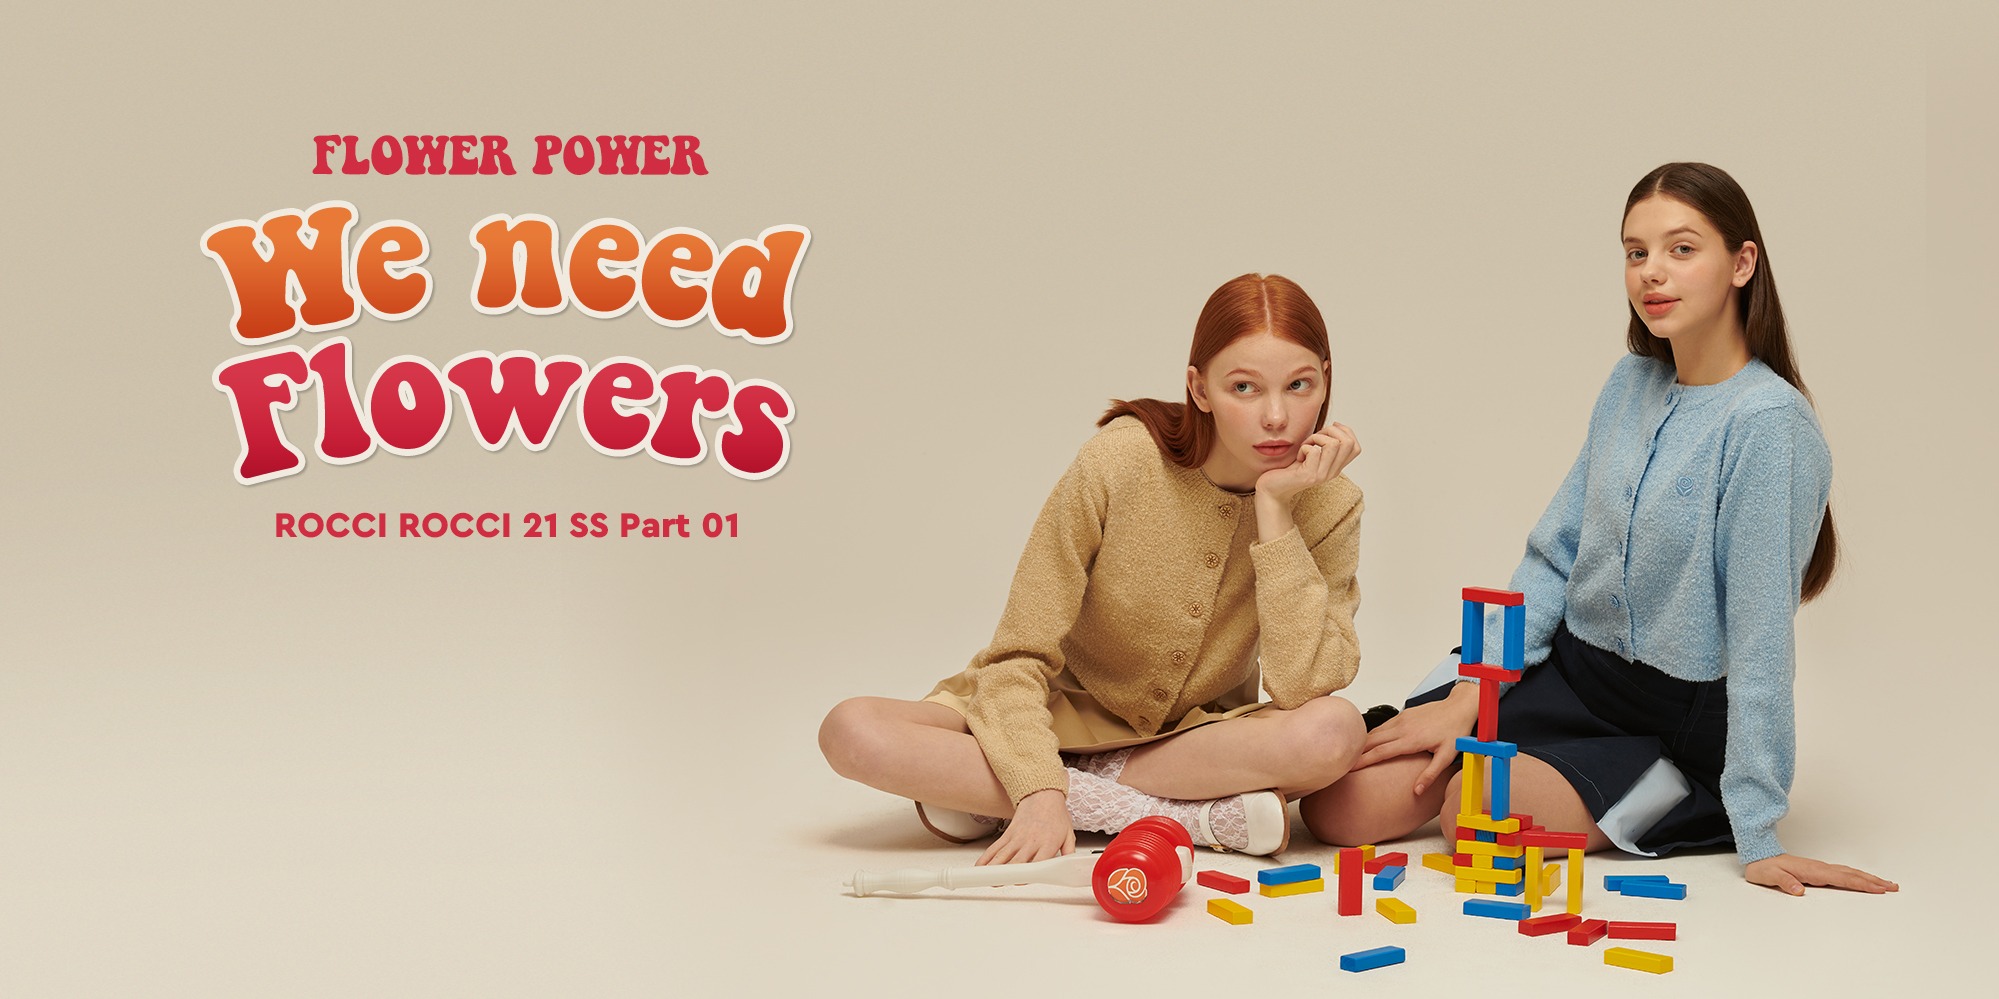 21 SS Part 01. flower power - We need flowers21 SS Part 01. flower power - We need flowers자체브랜드